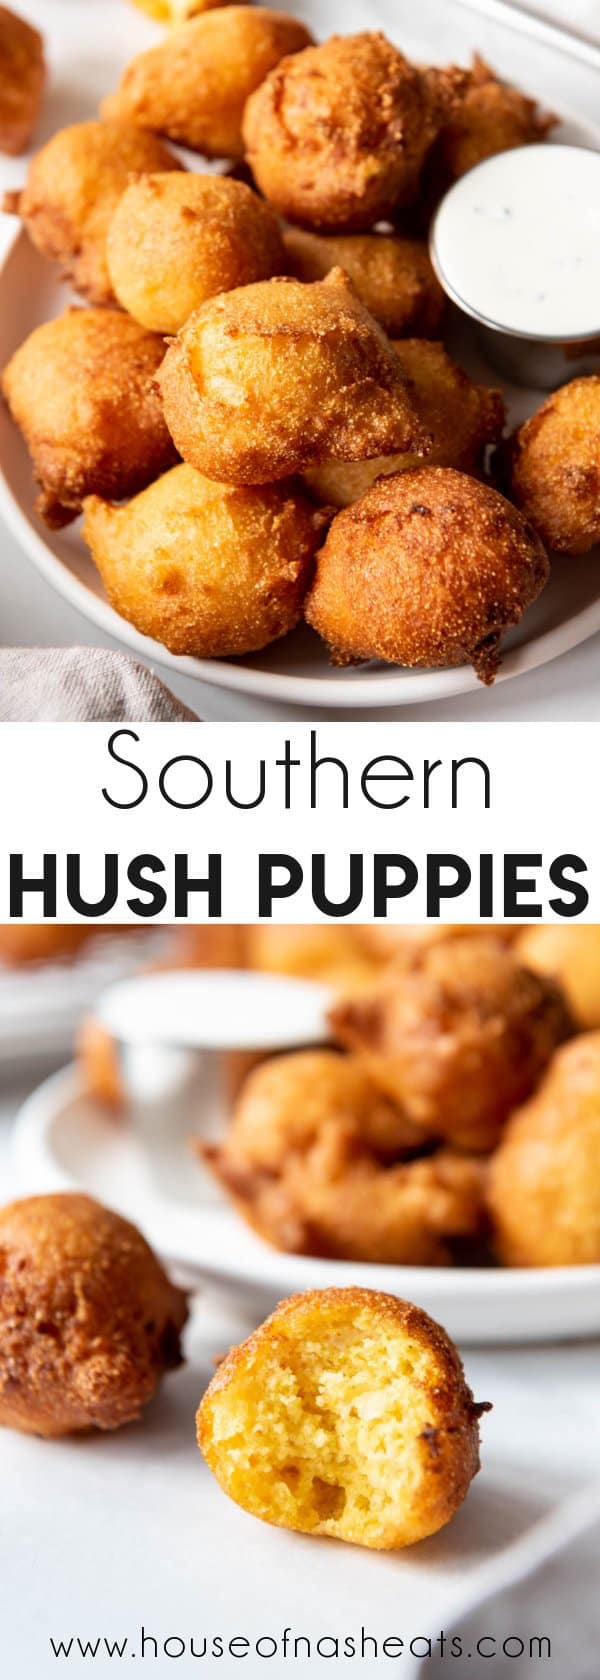 A collage of images of Southern hush puppies with text overlay.